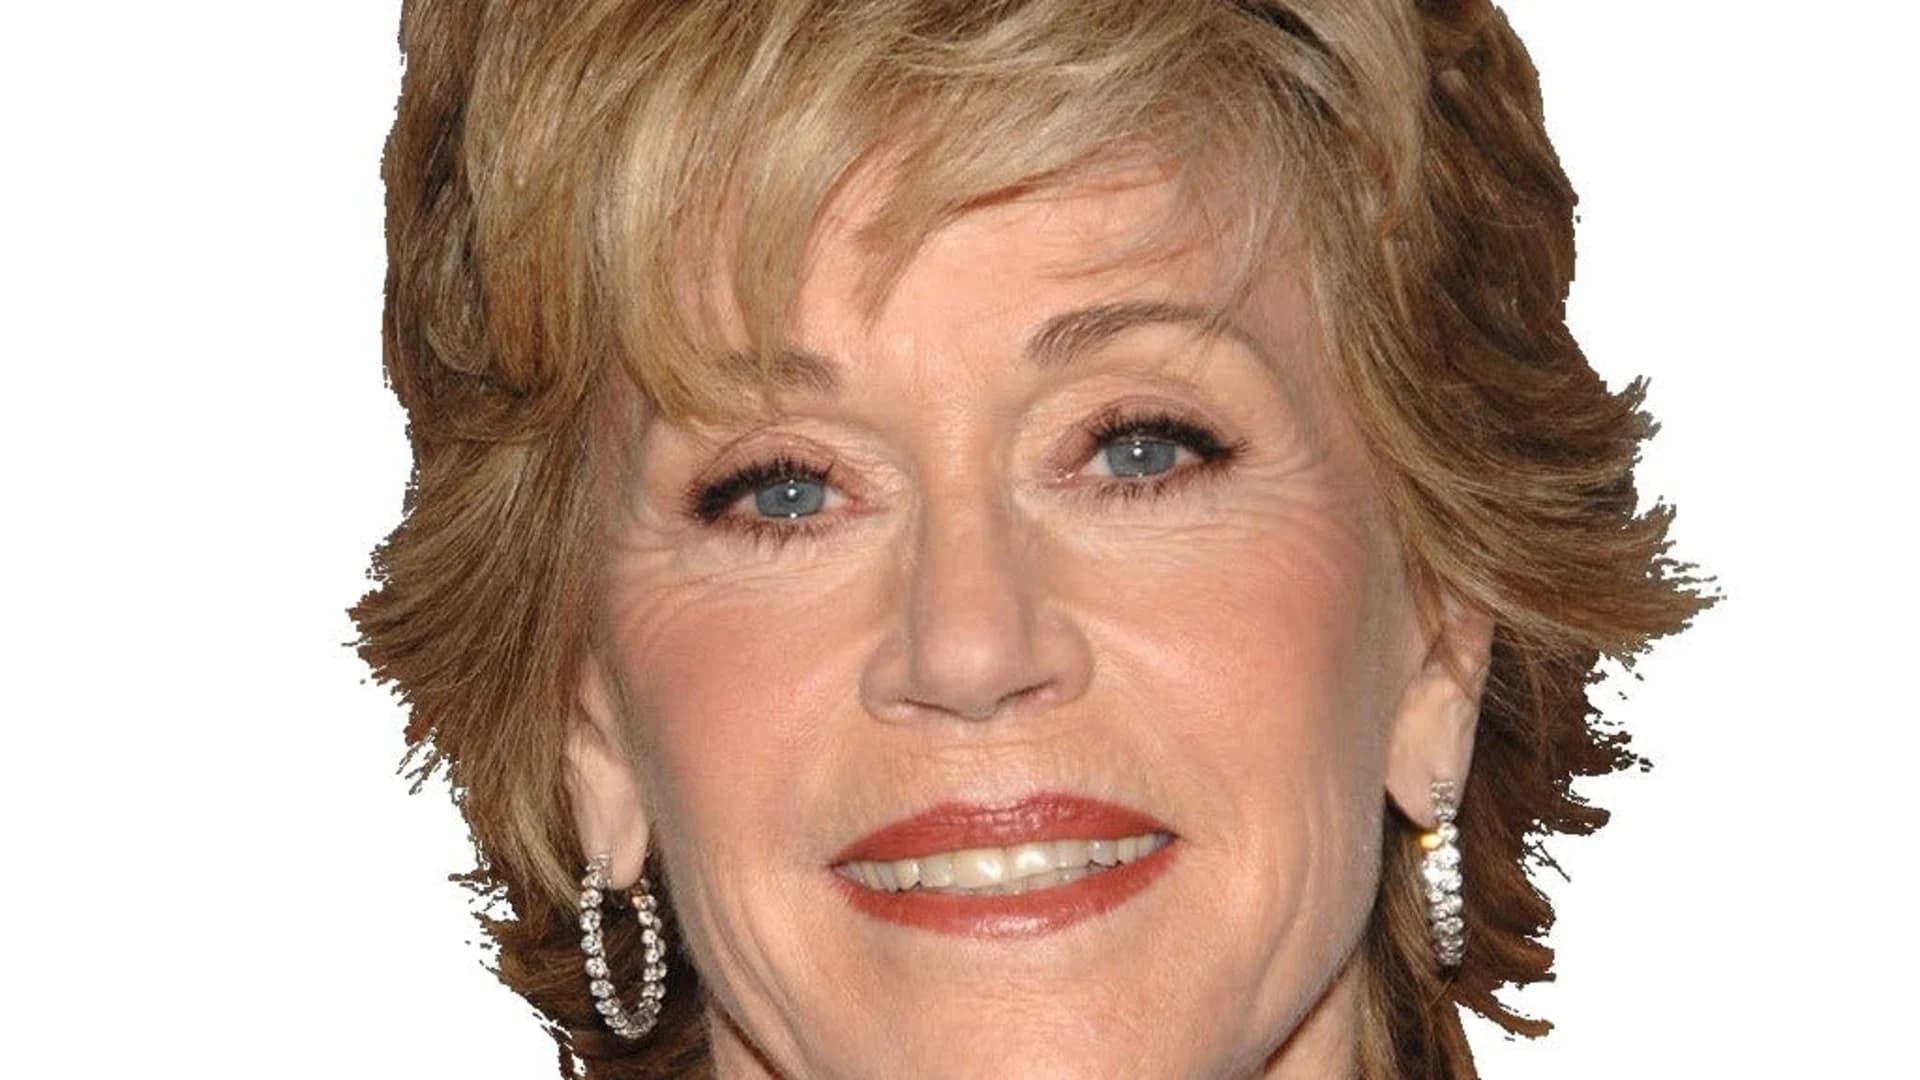 New York town official doesn't want Jane Fonda in Hall of Fame